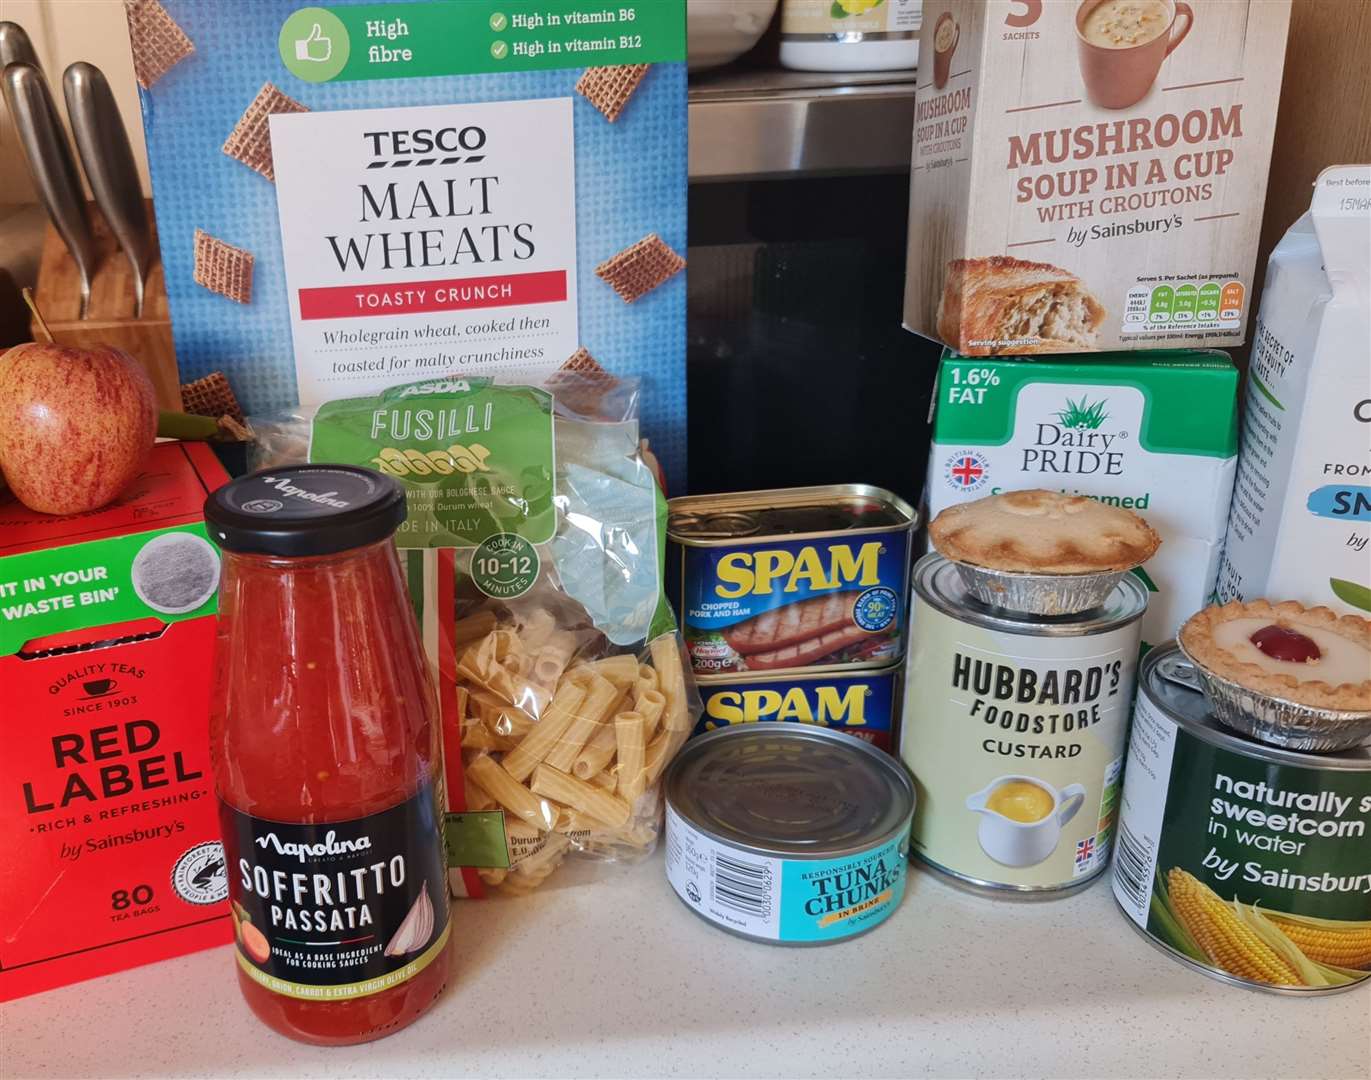 Items in the food bank parcel